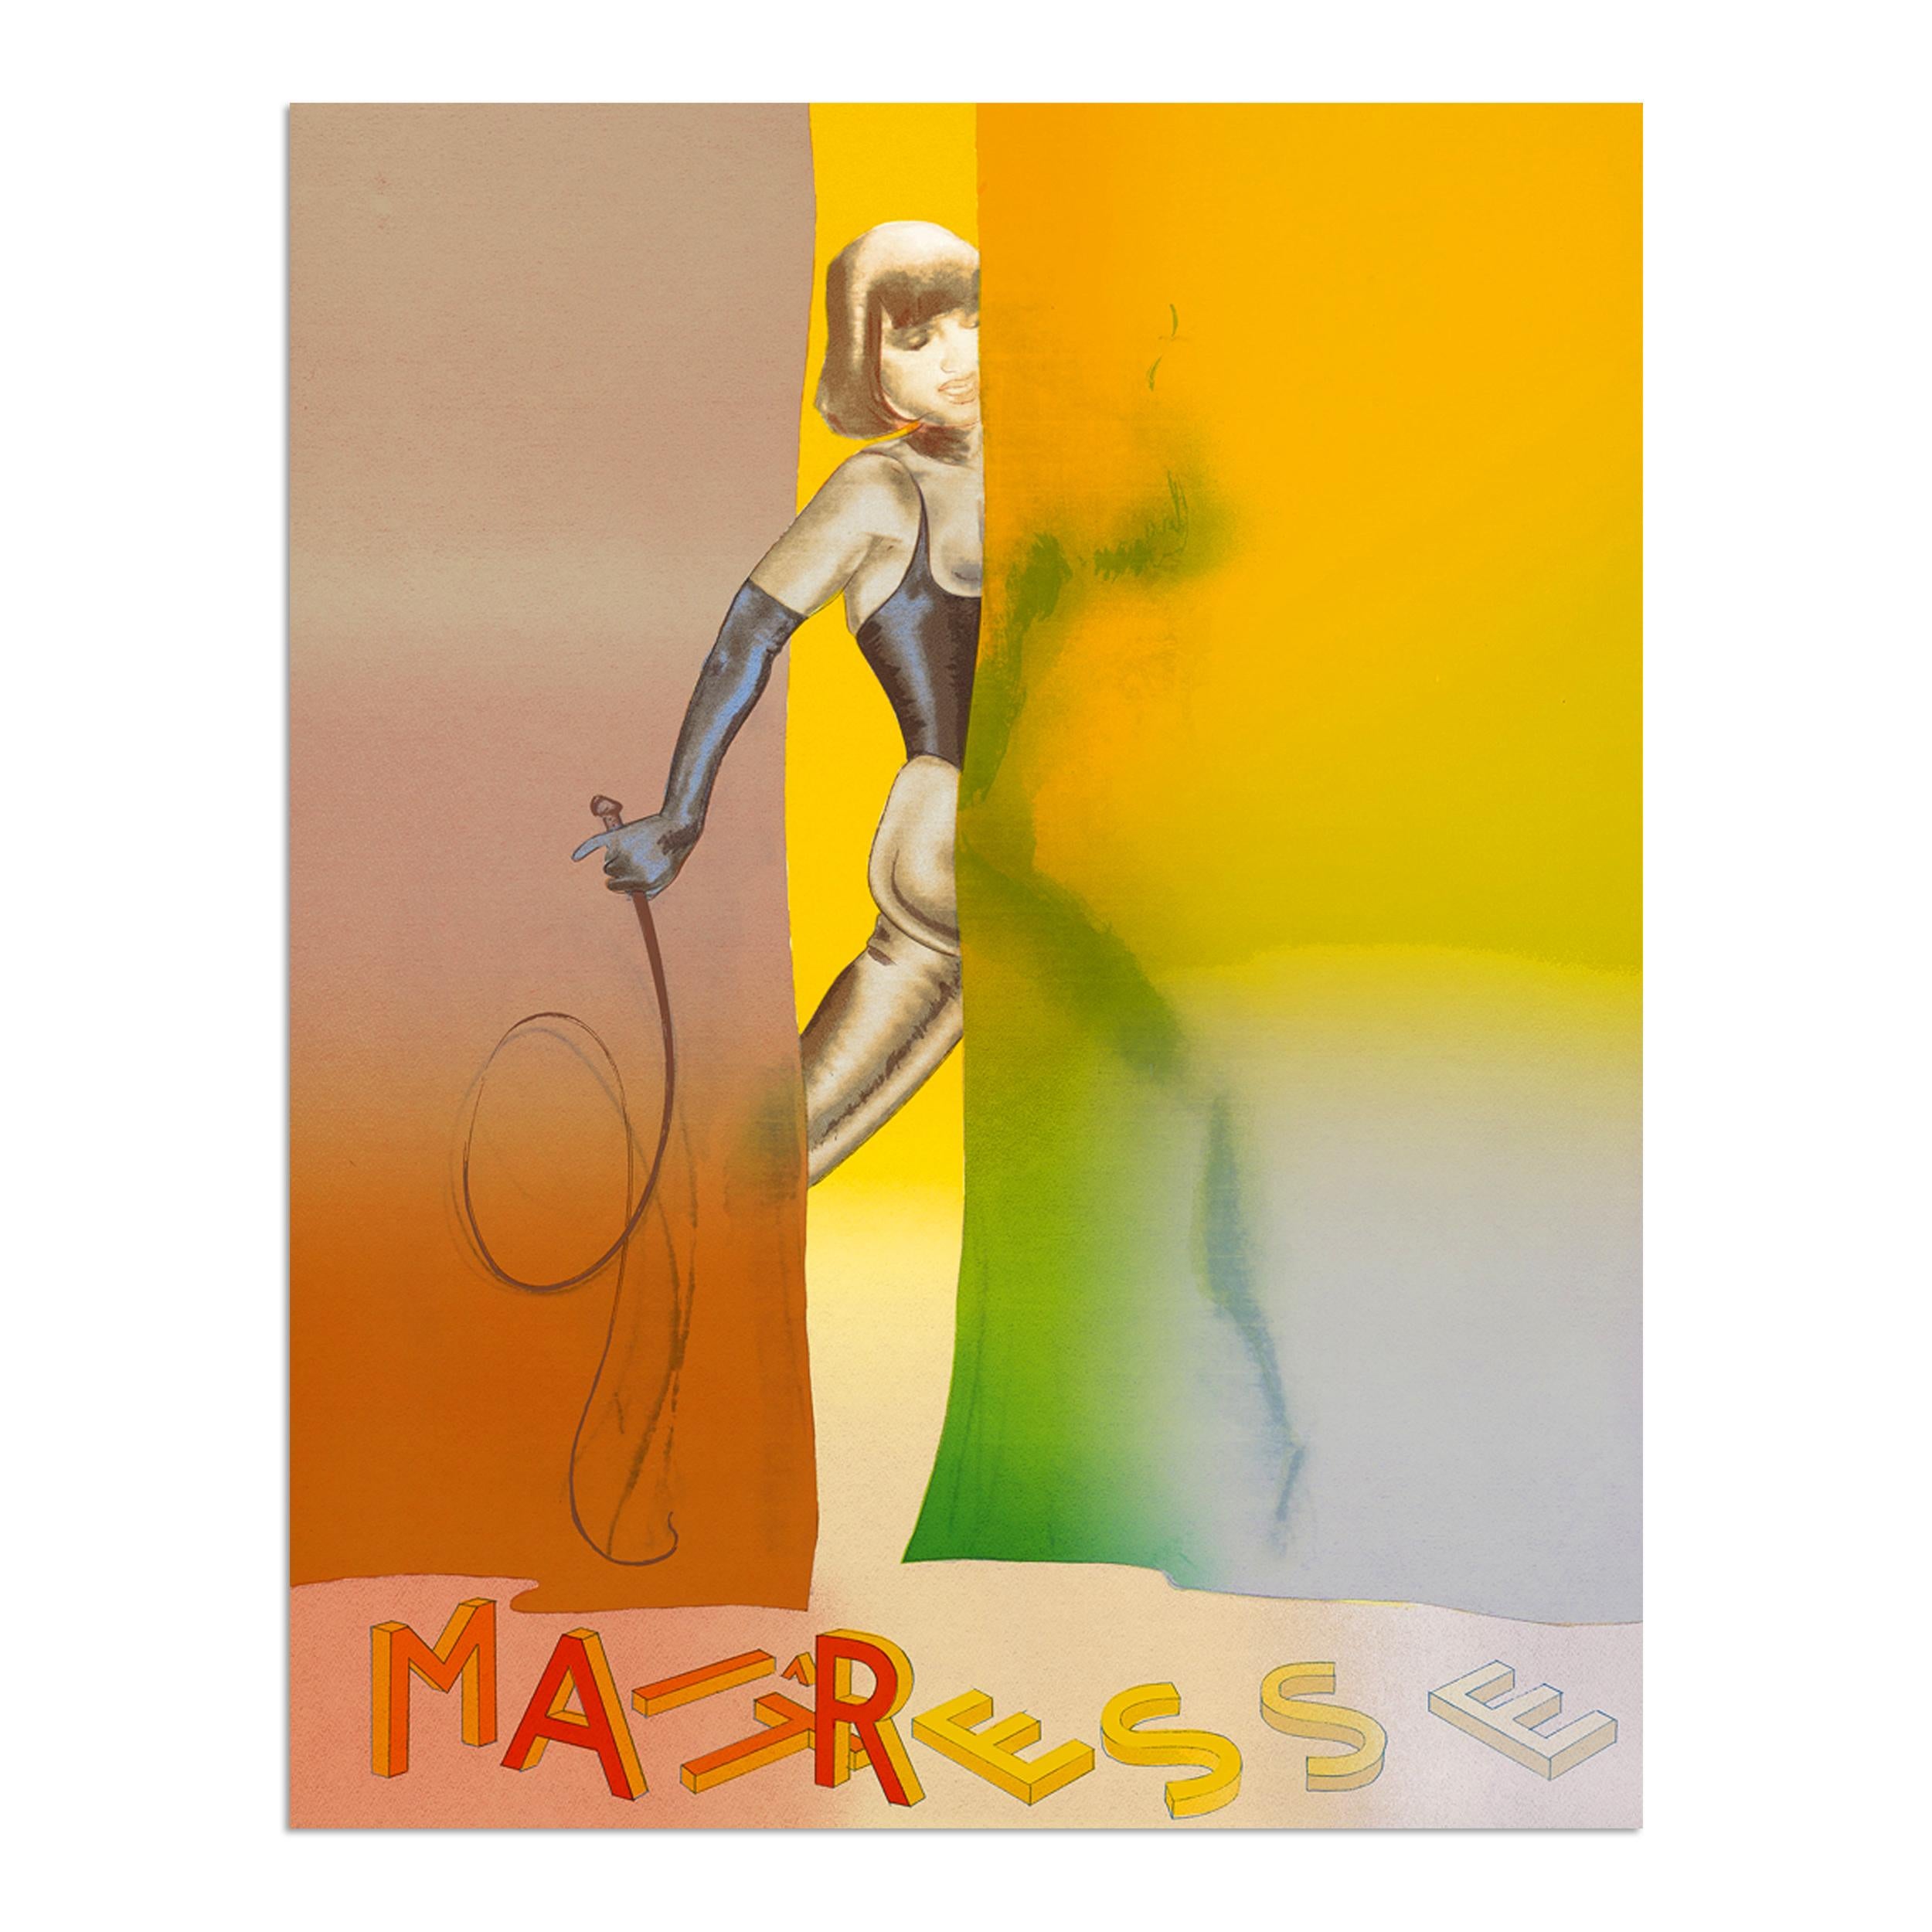 Allen Jones (British, b. 1937)
What If / Maîtresse Folio Screenprint III, 2016
Medium: Screenprint in 35 colors, on Bockingford 400 gsm
Dimensions: 106 x 80 cm (41 x 31 in)
Edition of 40 + 8 AP: Hand signed and numbered
Condition: Mint